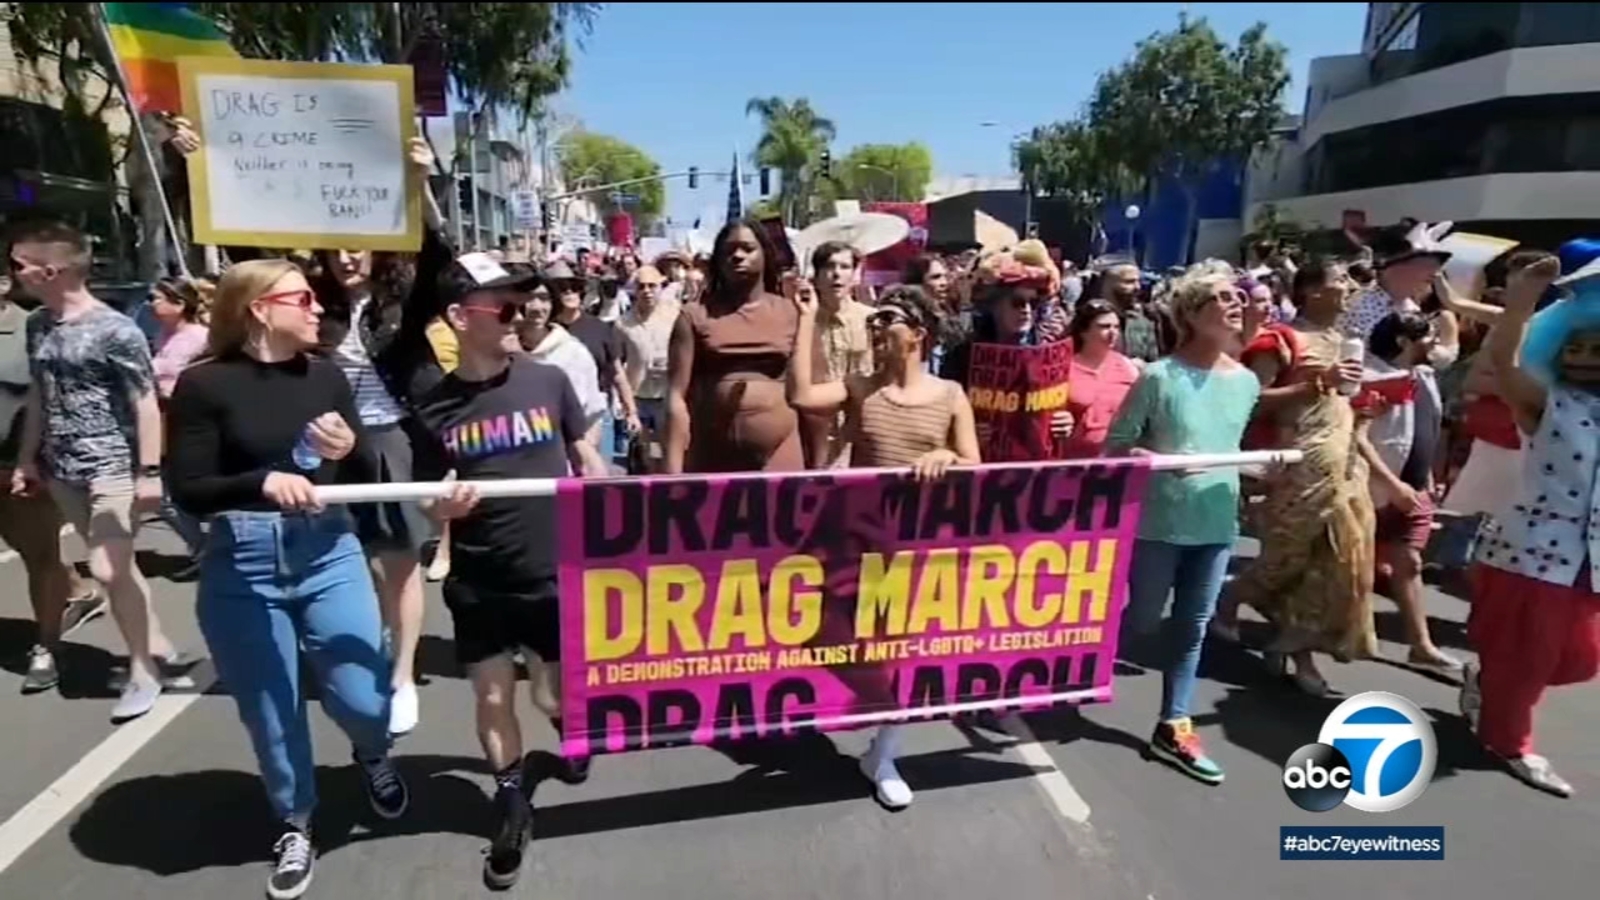 Thousands Of WeHo Residents Flock To Inaugural "Drag March" To Protest Anti-Drag Bills